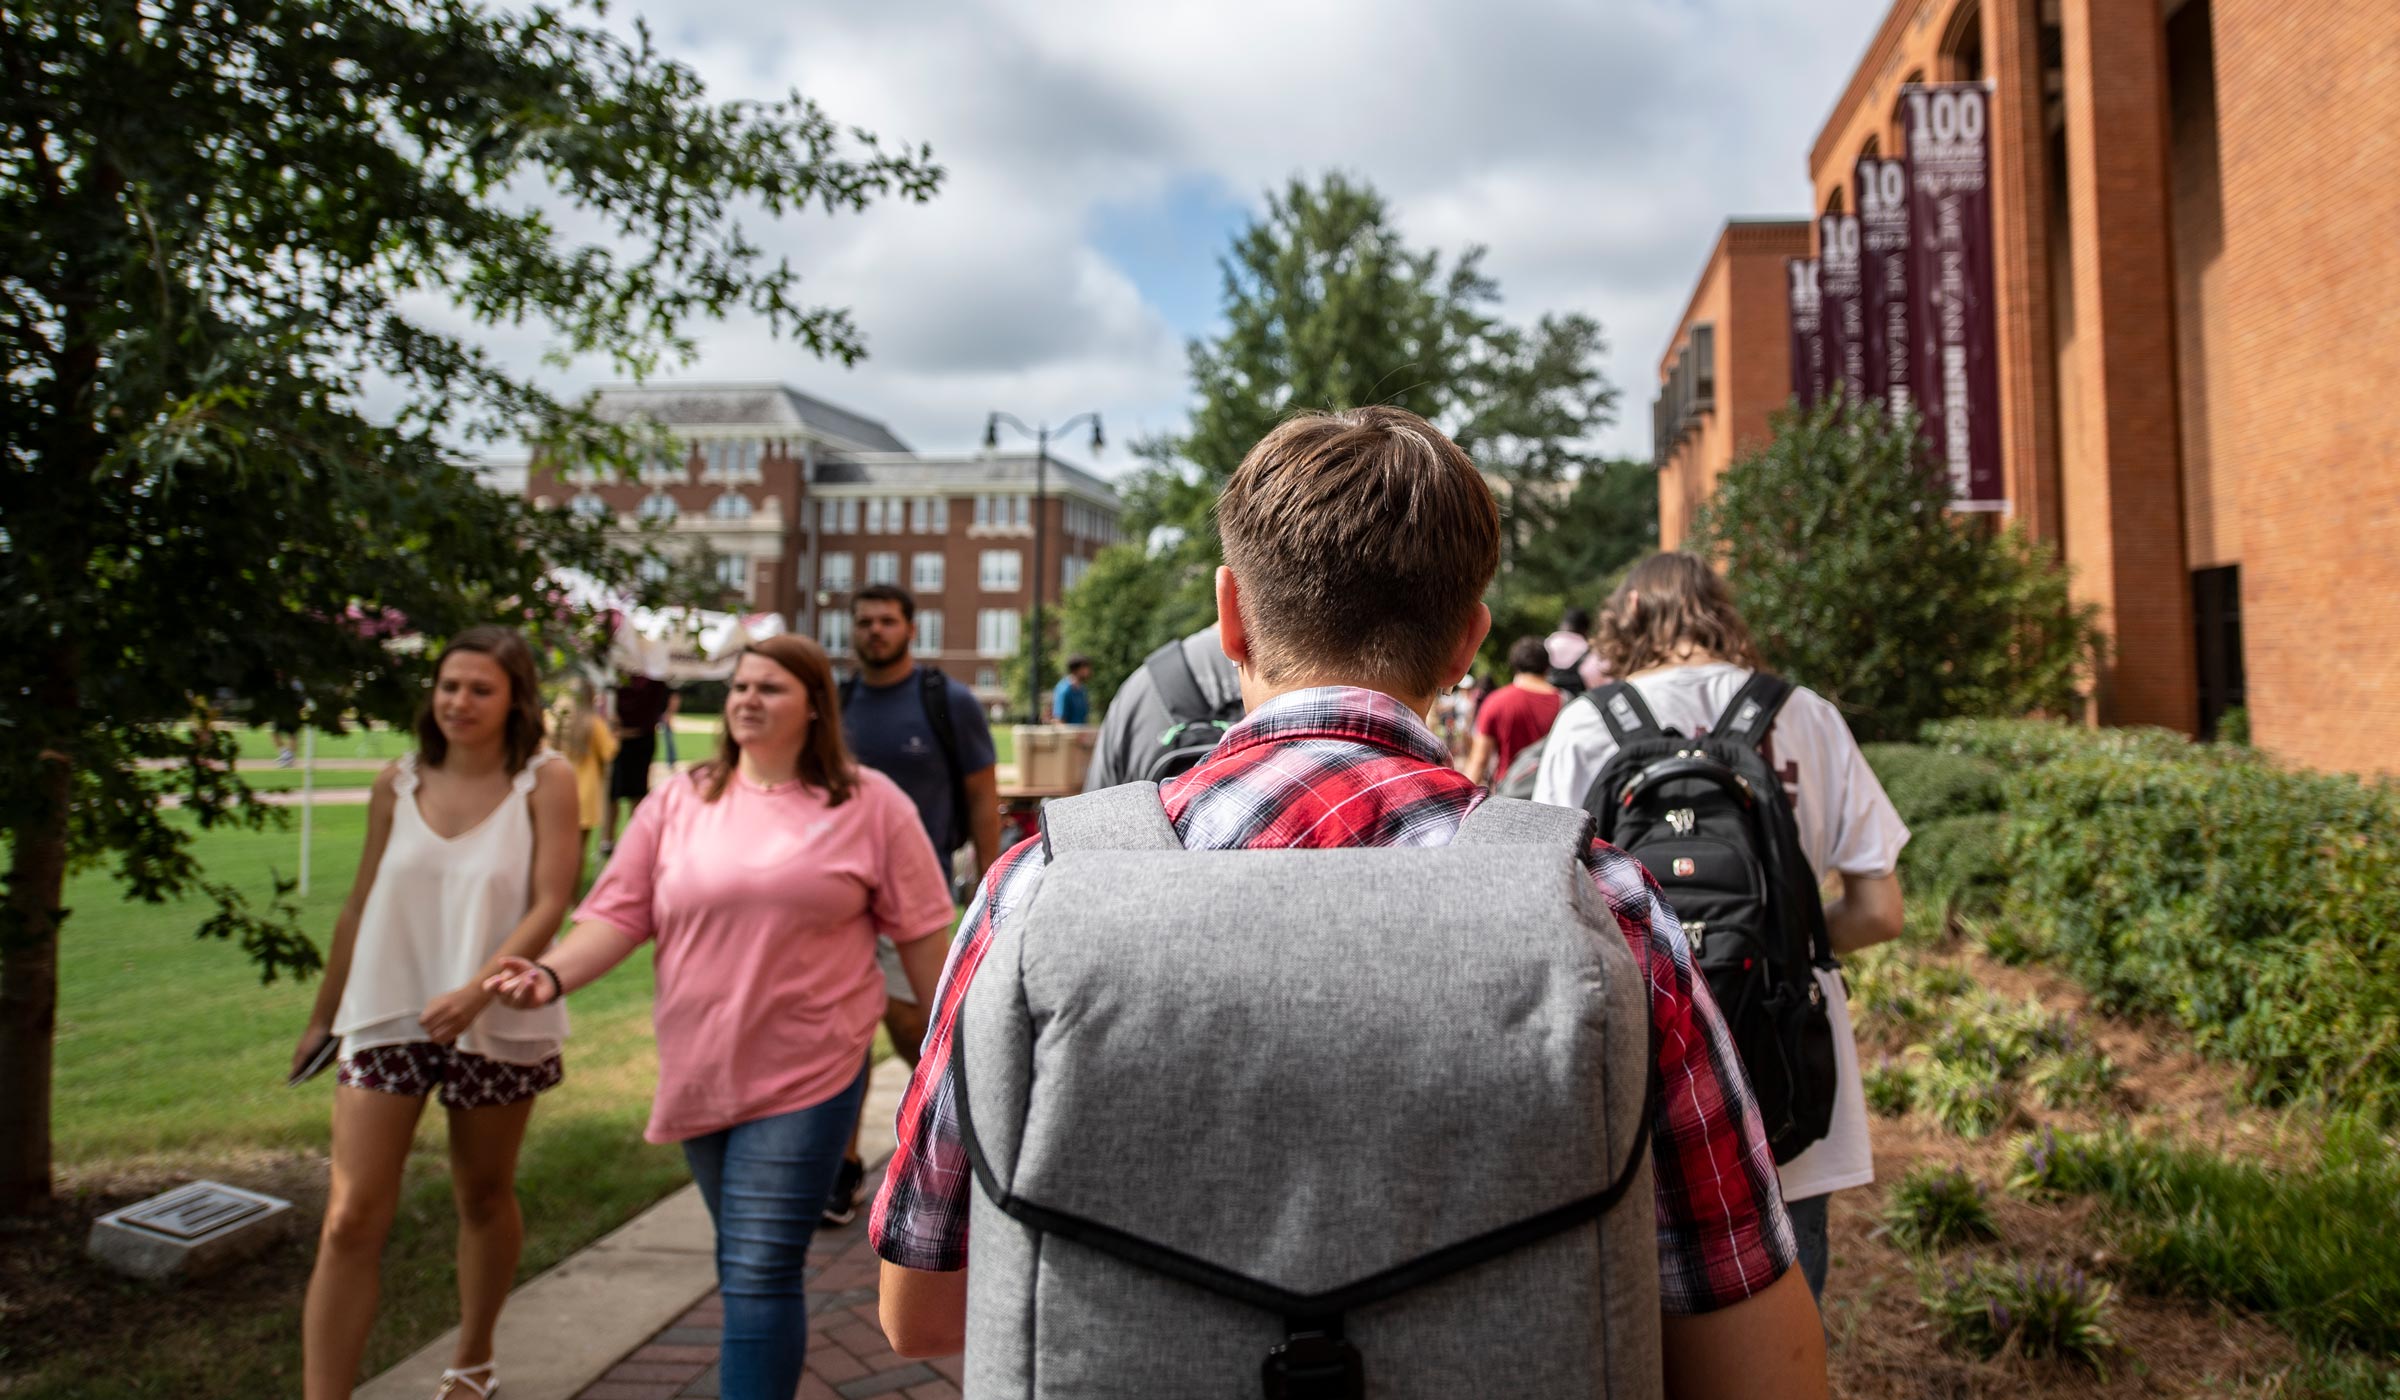 Students walk on the sidewalk during the first day of class for the 2019 Fall Semester.